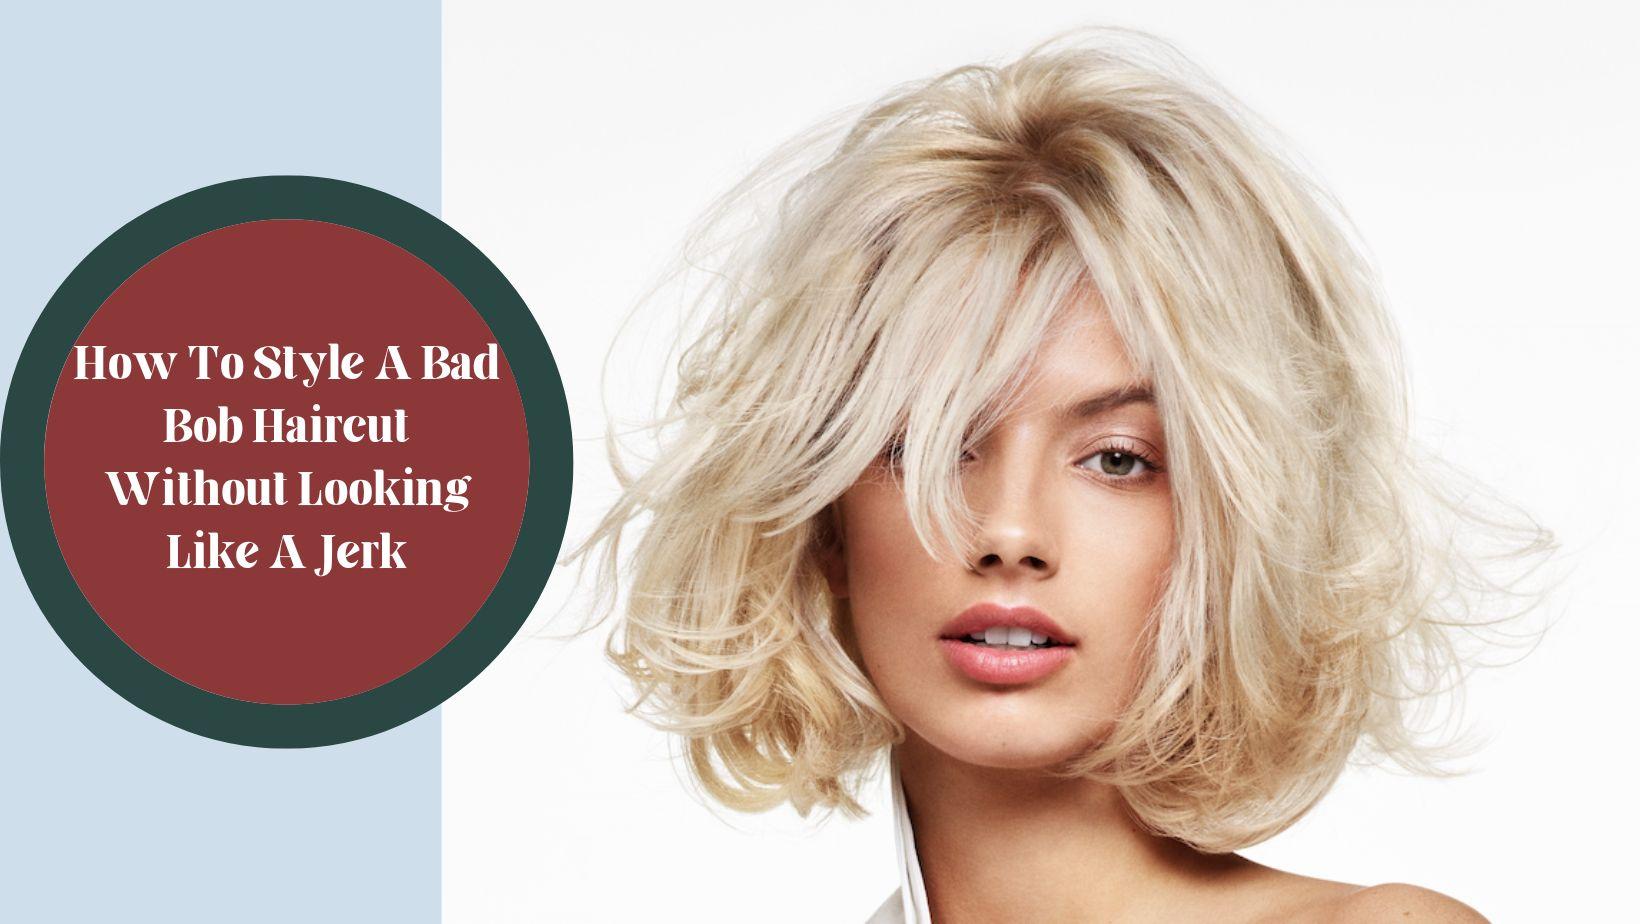 How To Style A Bad Bob Haircut